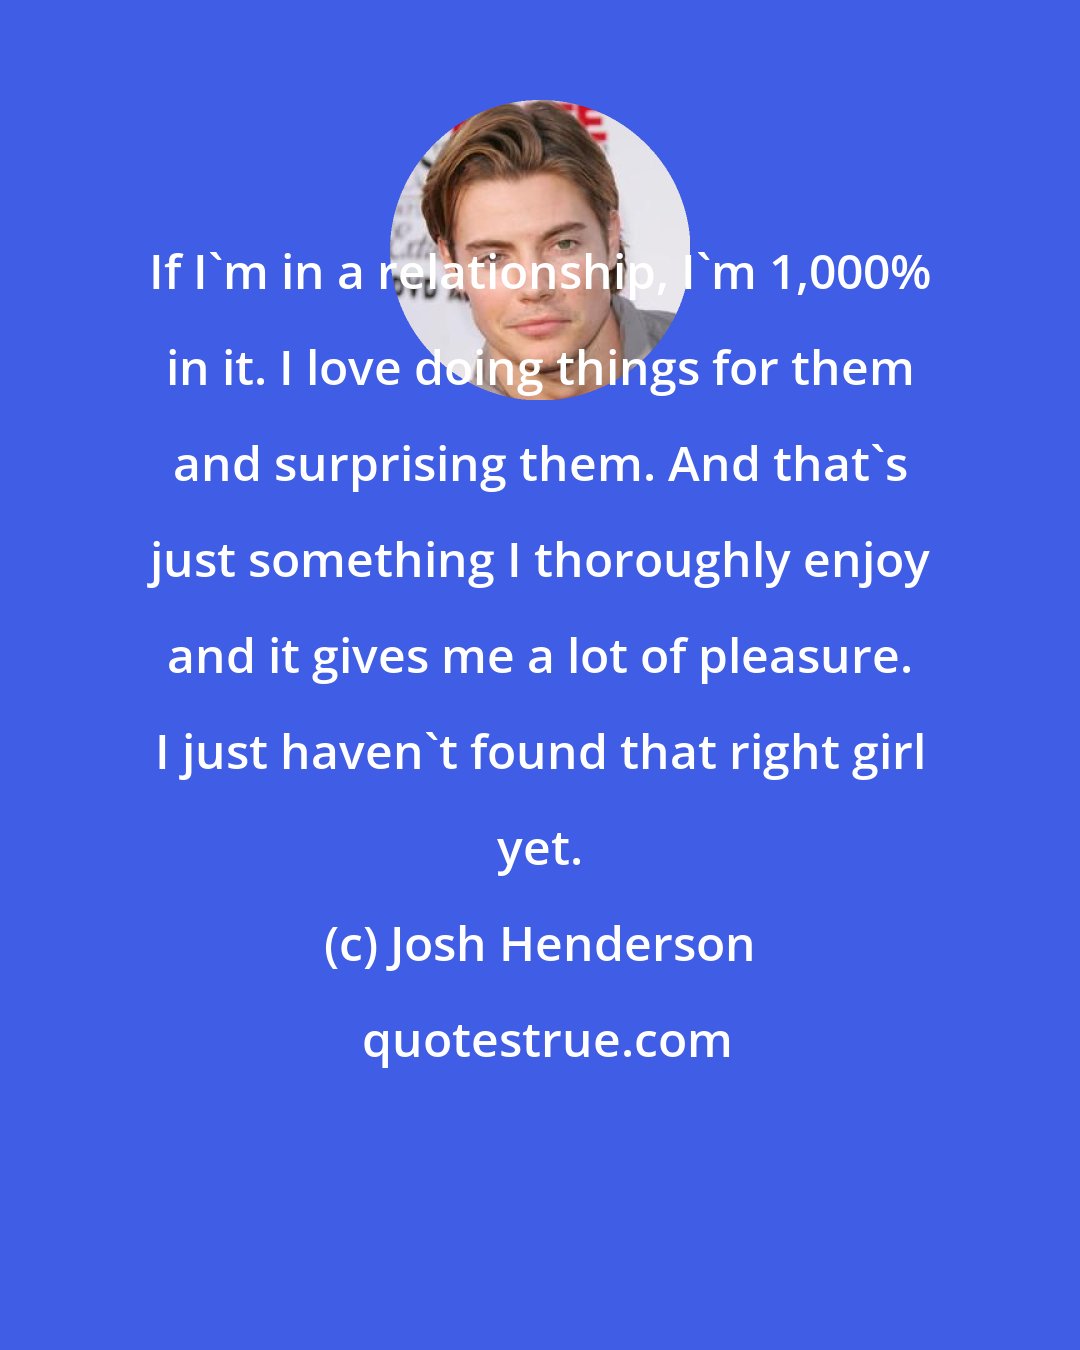 Josh Henderson: If I'm in a relationship, I'm 1,000% in it. I love doing things for them and surprising them. And that's just something I thoroughly enjoy and it gives me a lot of pleasure. I just haven't found that right girl yet.